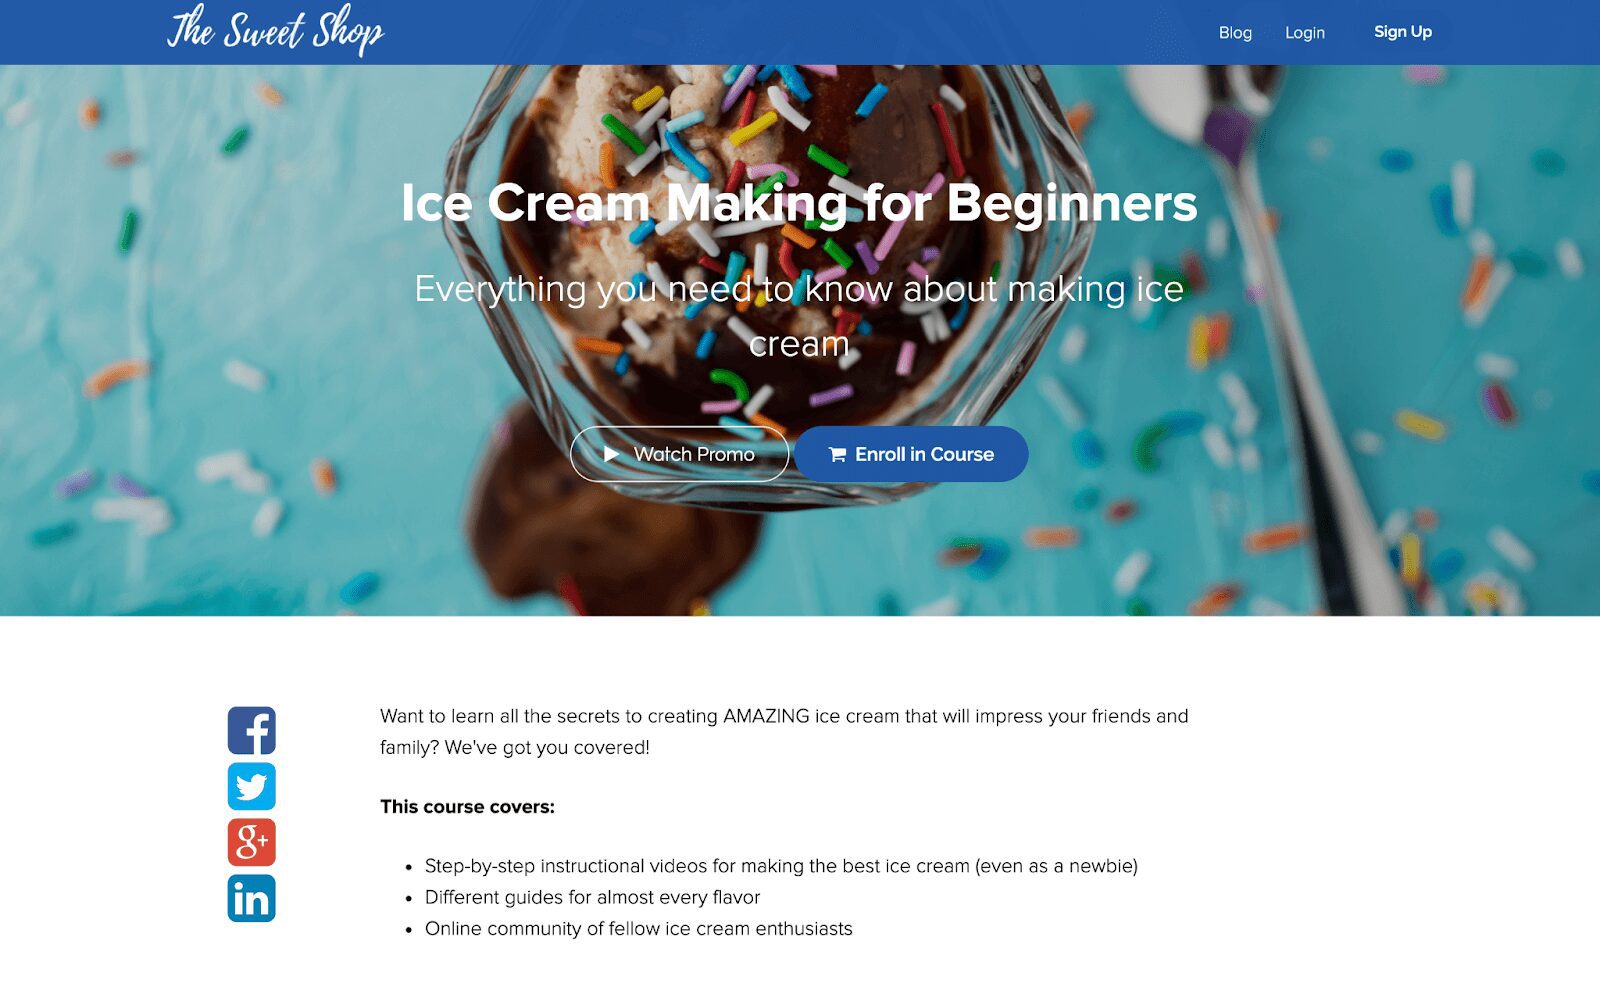 sample sales page for ice cream making with options to watch promo or enroll in course and what the course covers